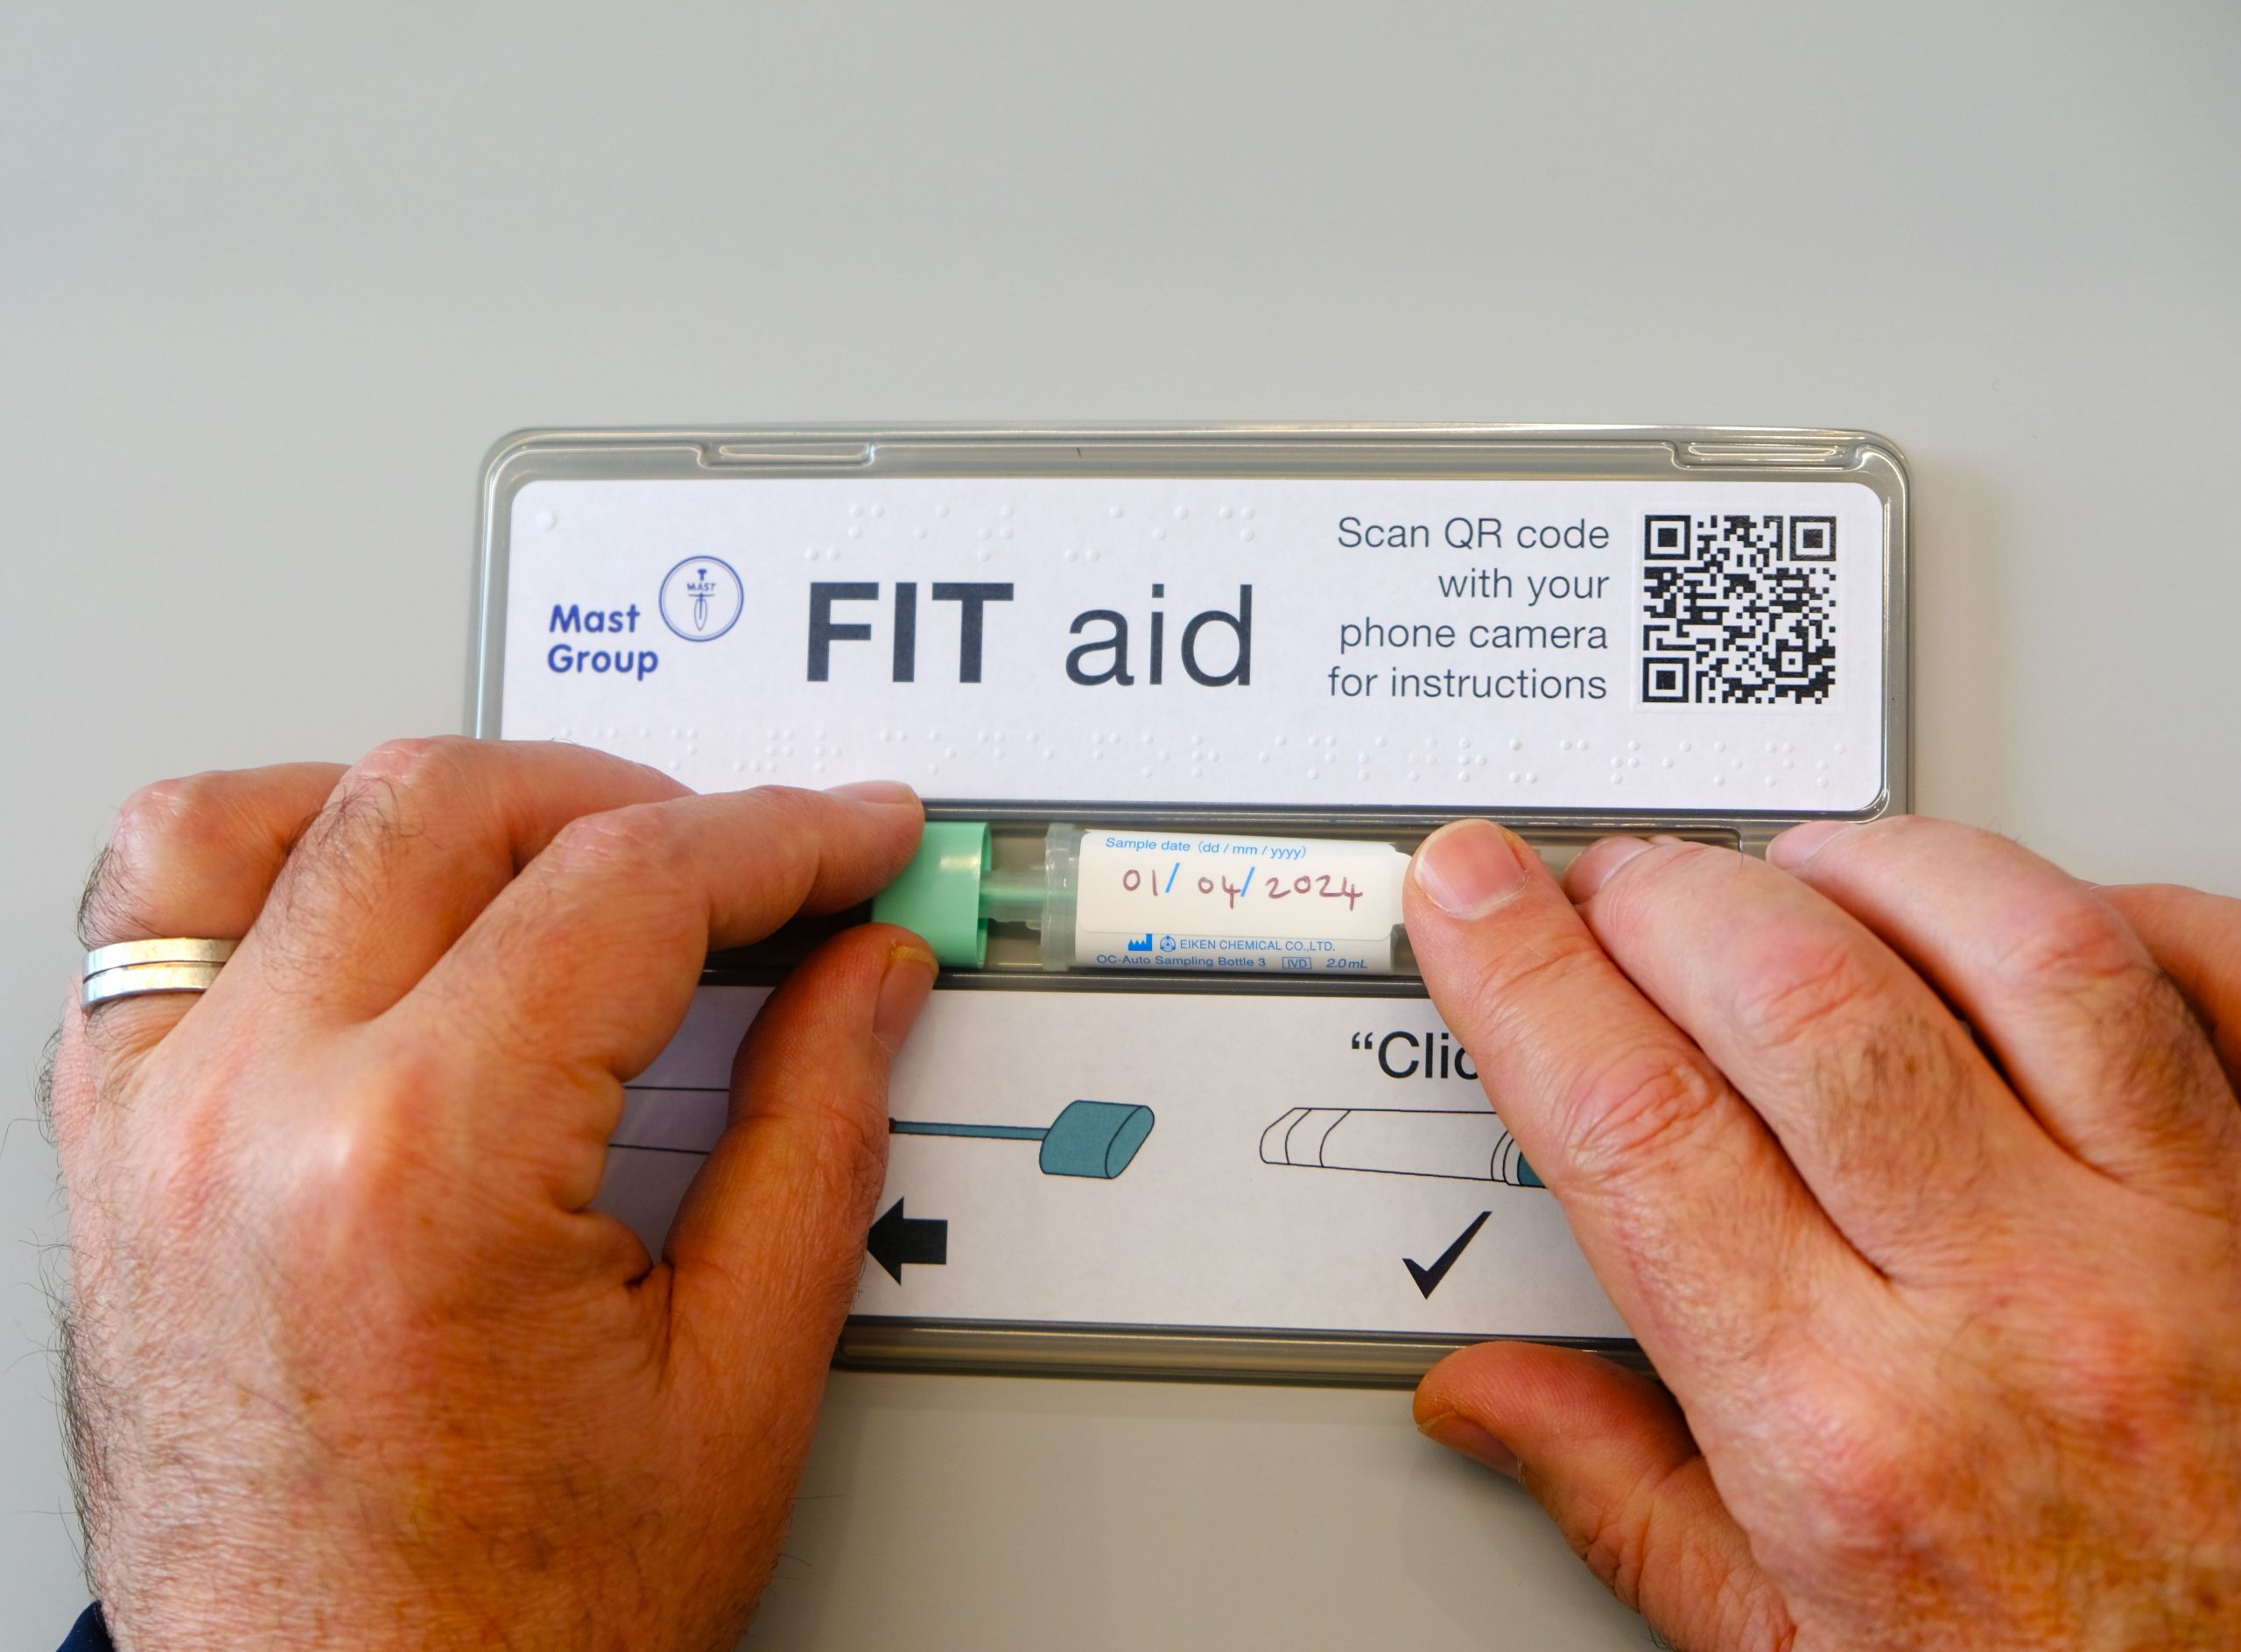 Image shows pair of hands using specially designed FIT aid tool. The open FIT aid box is placed on a surface. The pair of hands is sliding the dip stick and bottle towards one another, within the channel in the box, closing them together.